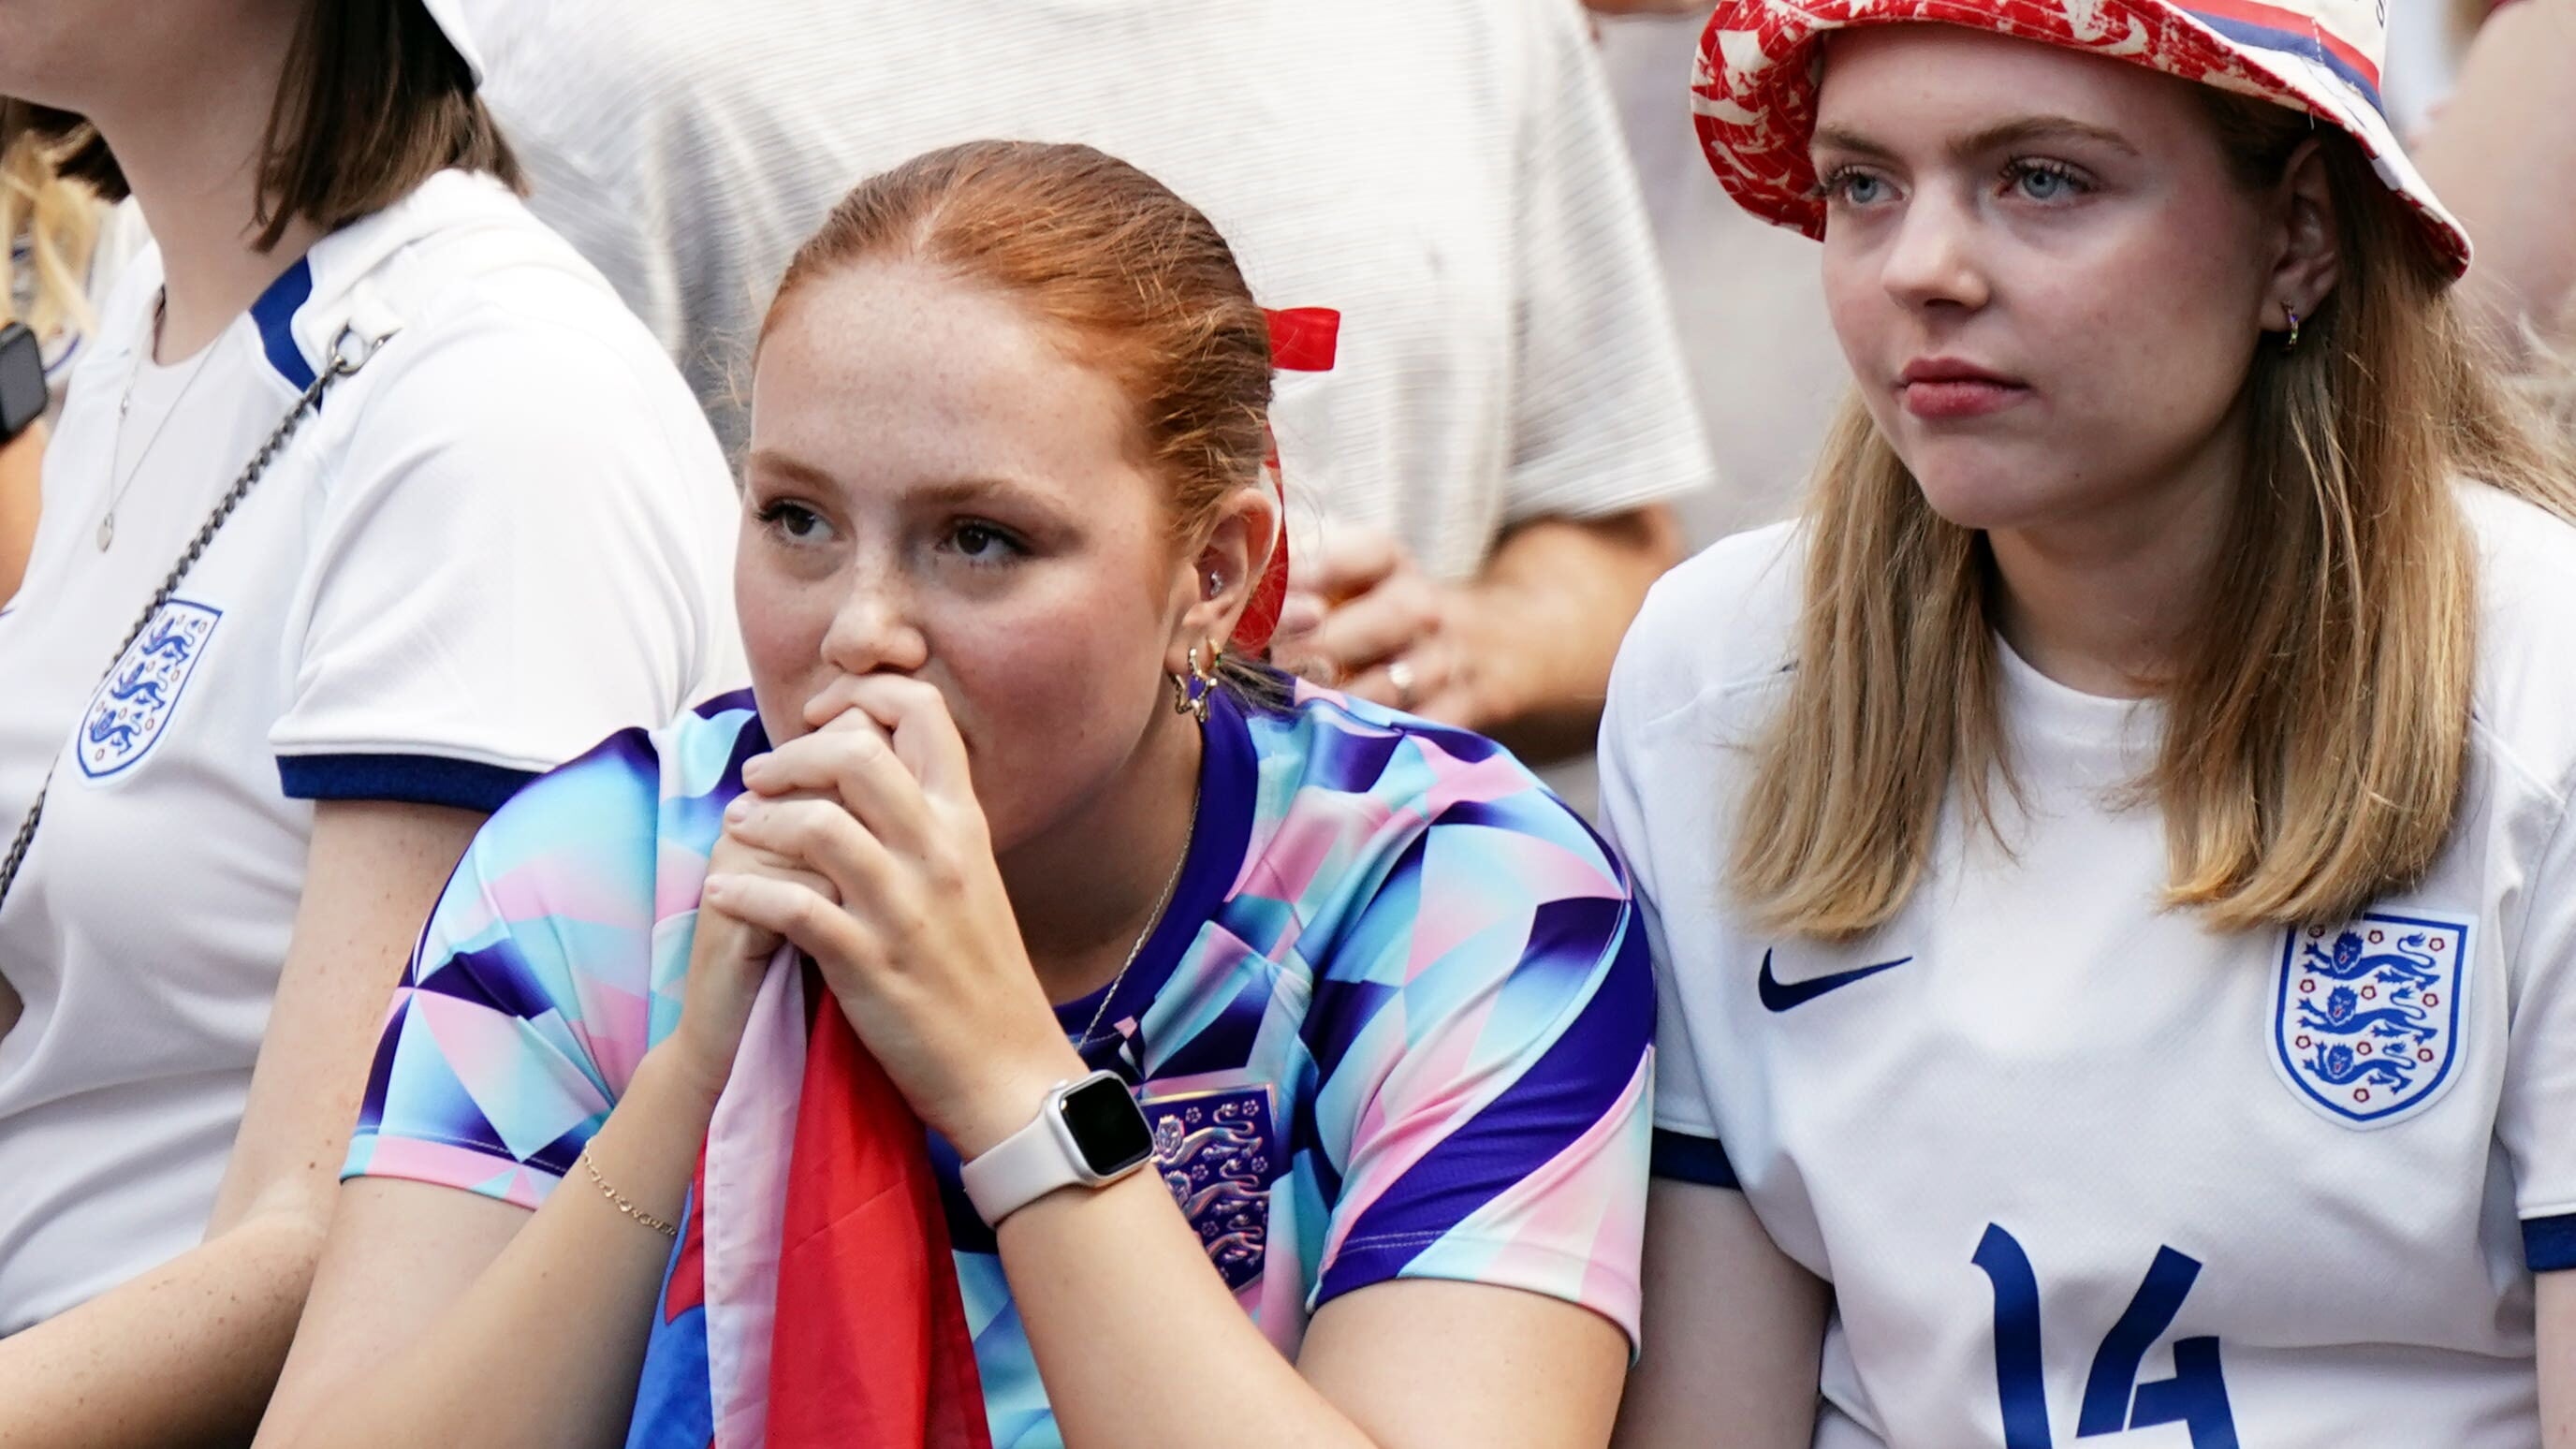 England fans watched a screening of the Women’s World Cup final in Croydon (Aaron Chown/PA)